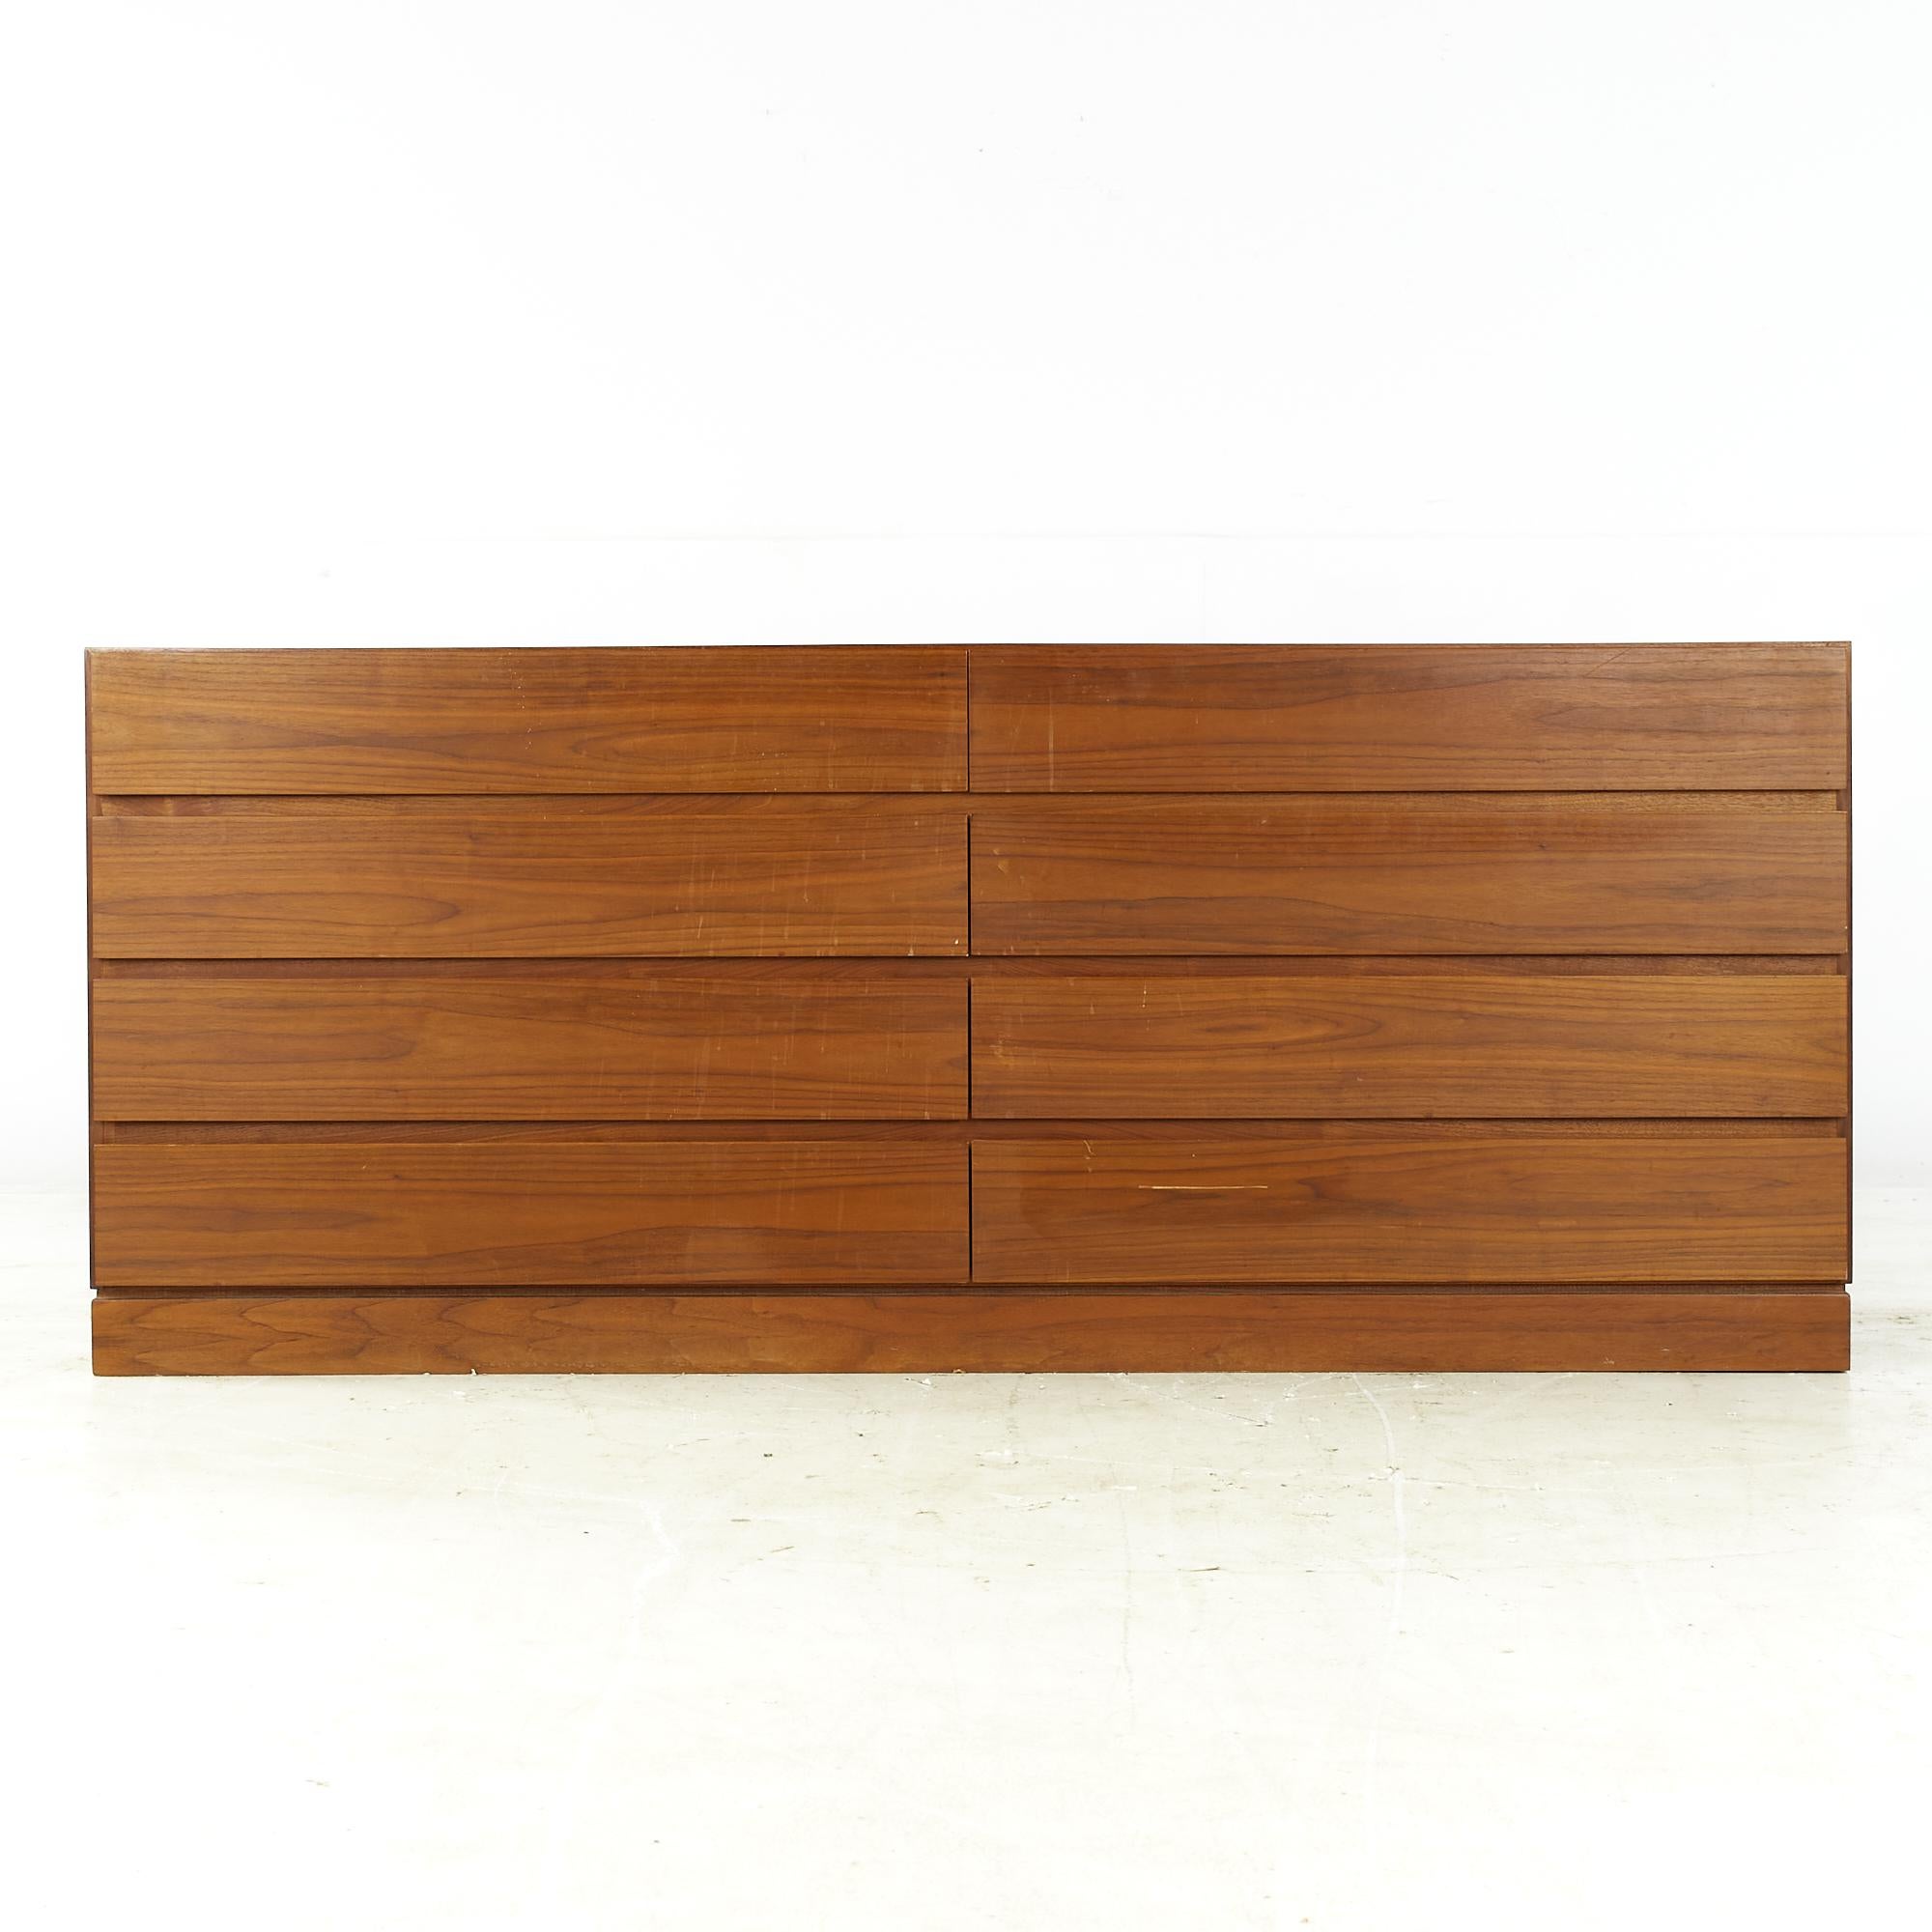 Arne Wahl Iversen for Vinde Mobelfabrik midcentury teak lowboy dresser.

This lowboy dresser measures: 71.5 wide x 17.75 deep x 29.75 inches high

All pieces of furniture can be had in what we call restored vintage condition. That means the